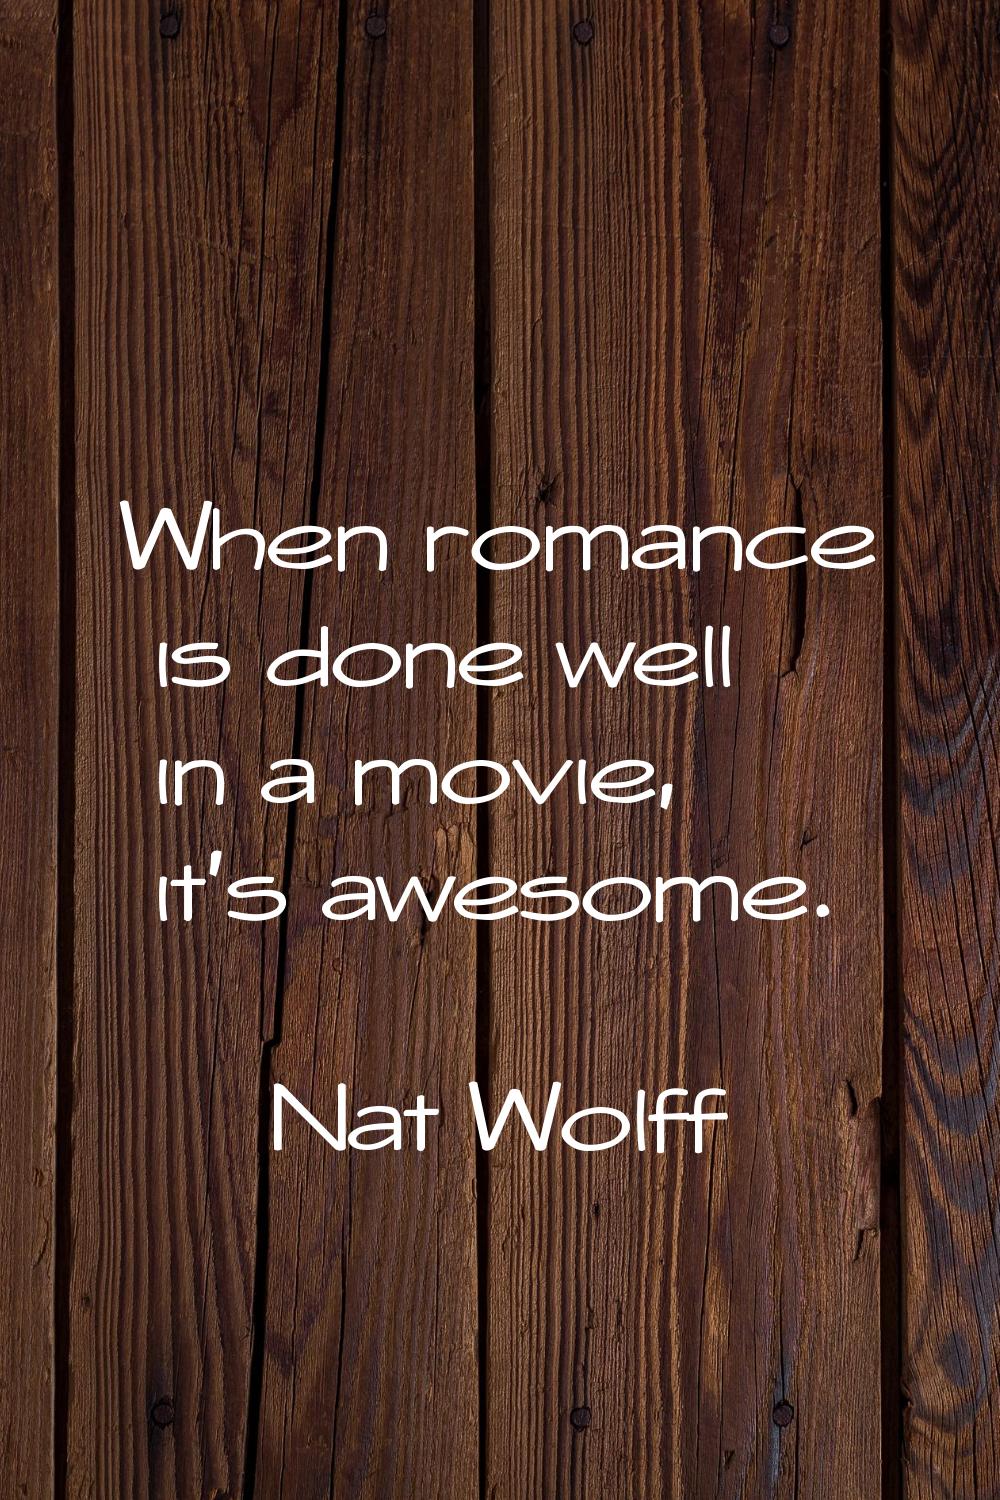 When romance is done well in a movie, it's awesome.